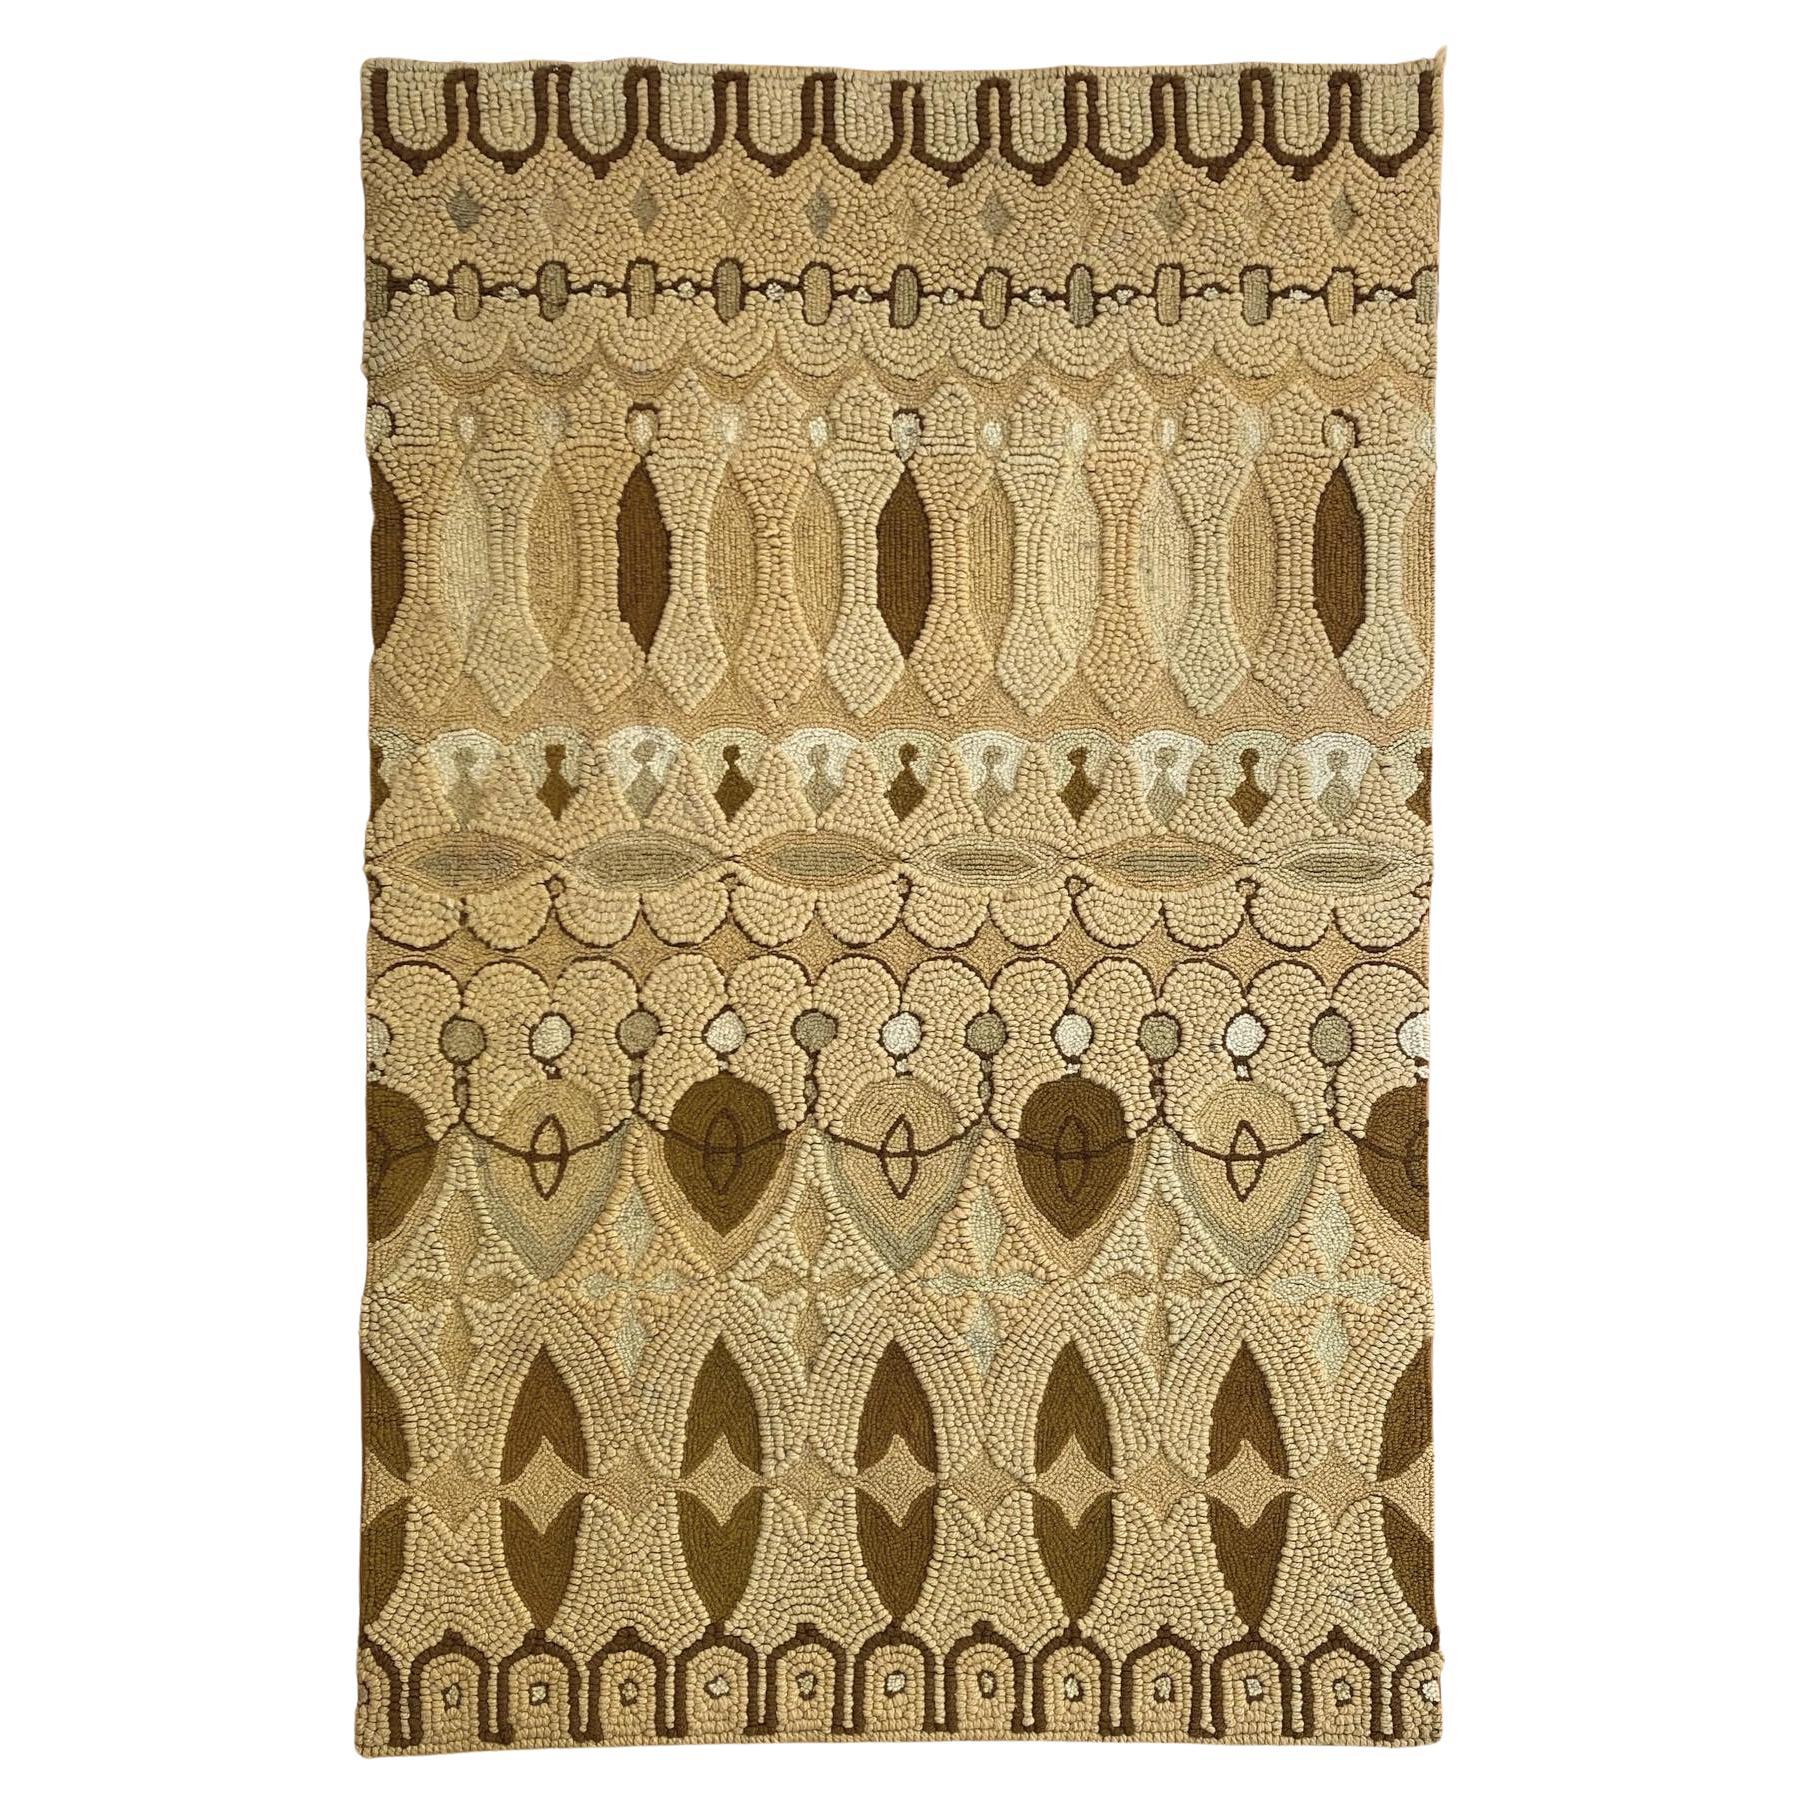 Tamacani hand hooked wool rug in the style of Cynthia Sargent “Bartok” model For Sale